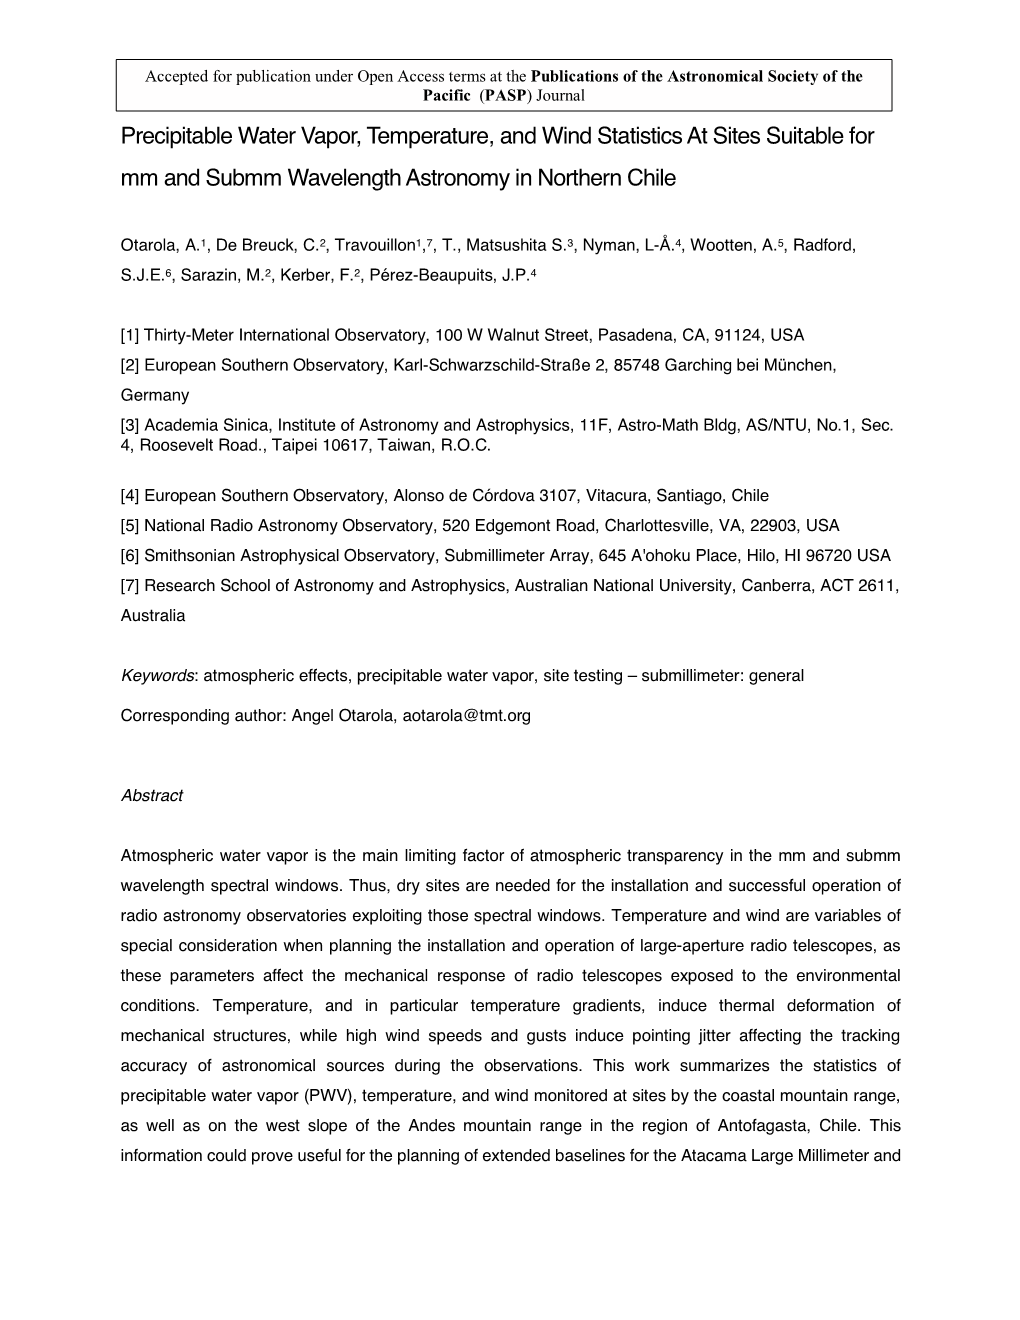 Precipitable Water Vapor, Temperature, and Wind Statistics at Sites Suitable for Mm and Submm Wavelength Astronomy in Northern Chile